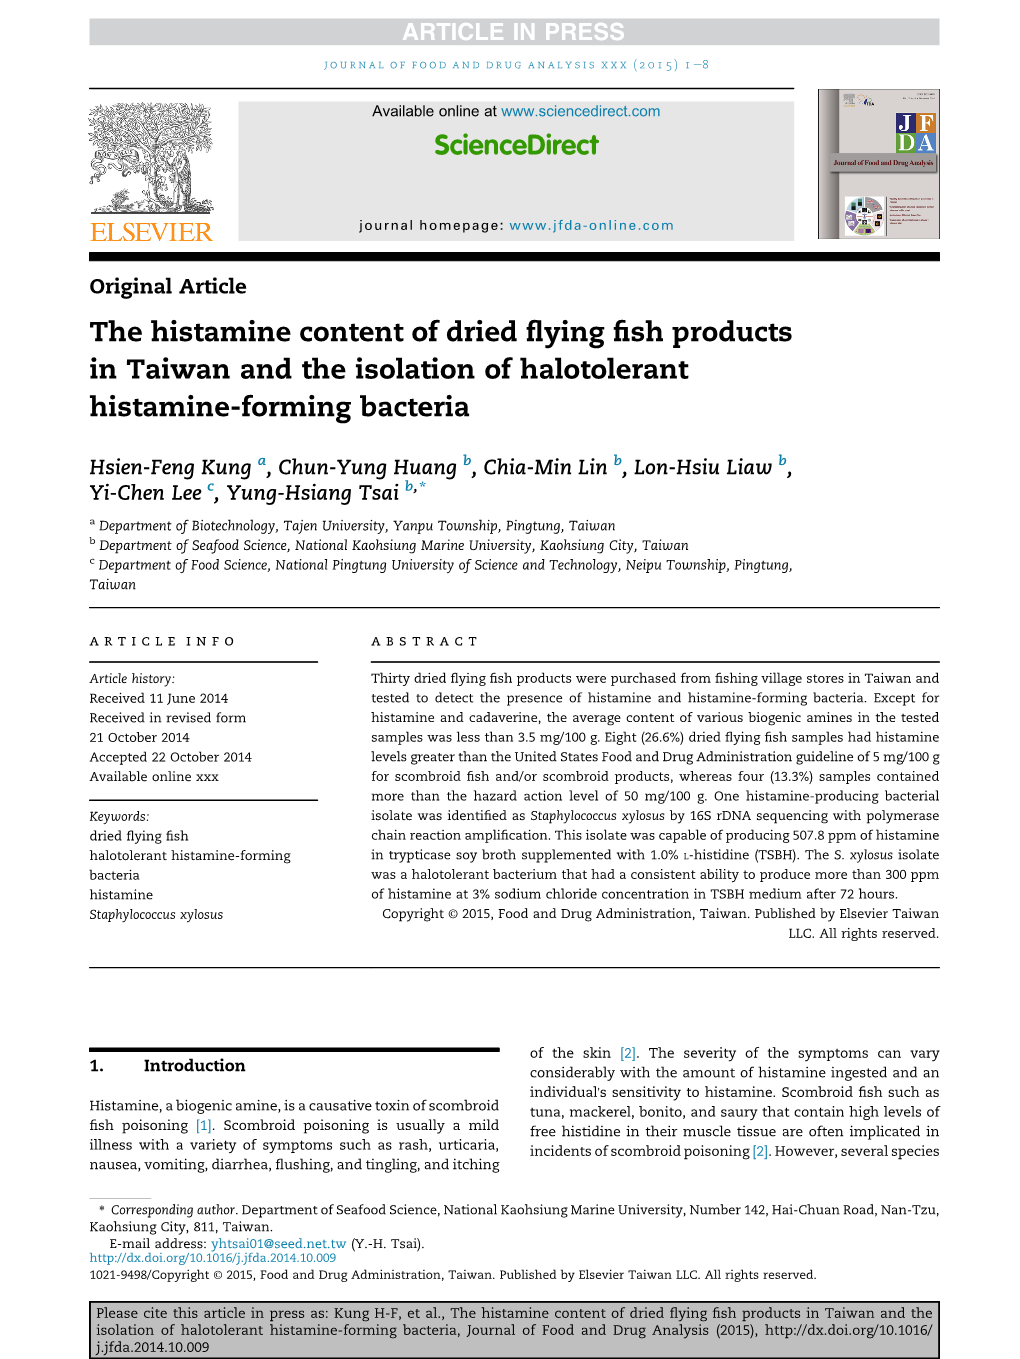 The Histamine Content of Dried Flying Fish Products in Taiwan and The